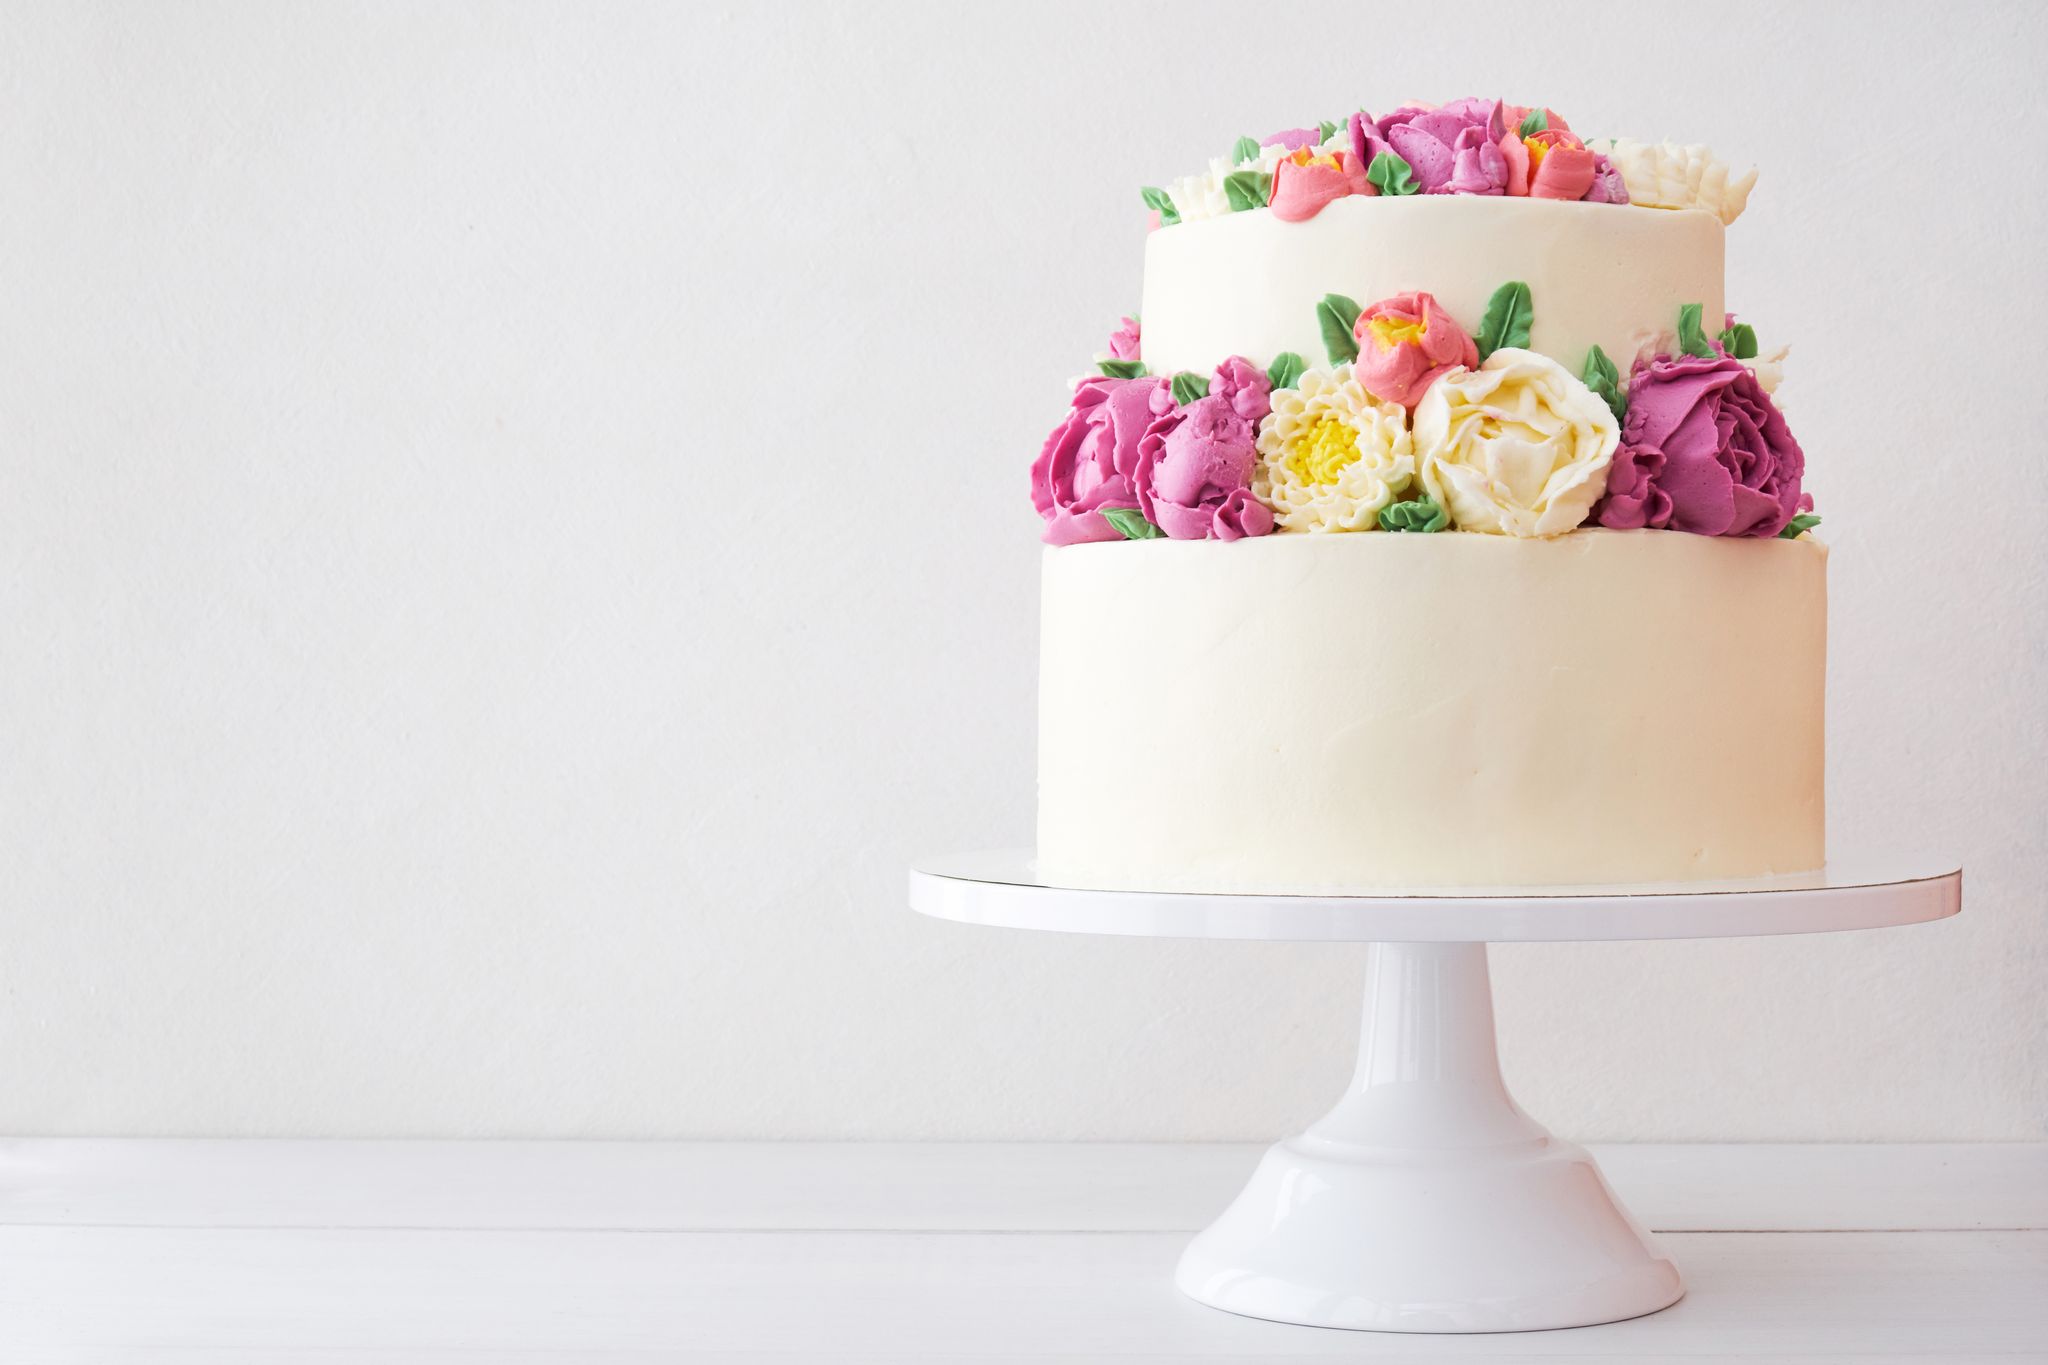 A two-tiered white cake with flower decorations. | Source: Getty Images